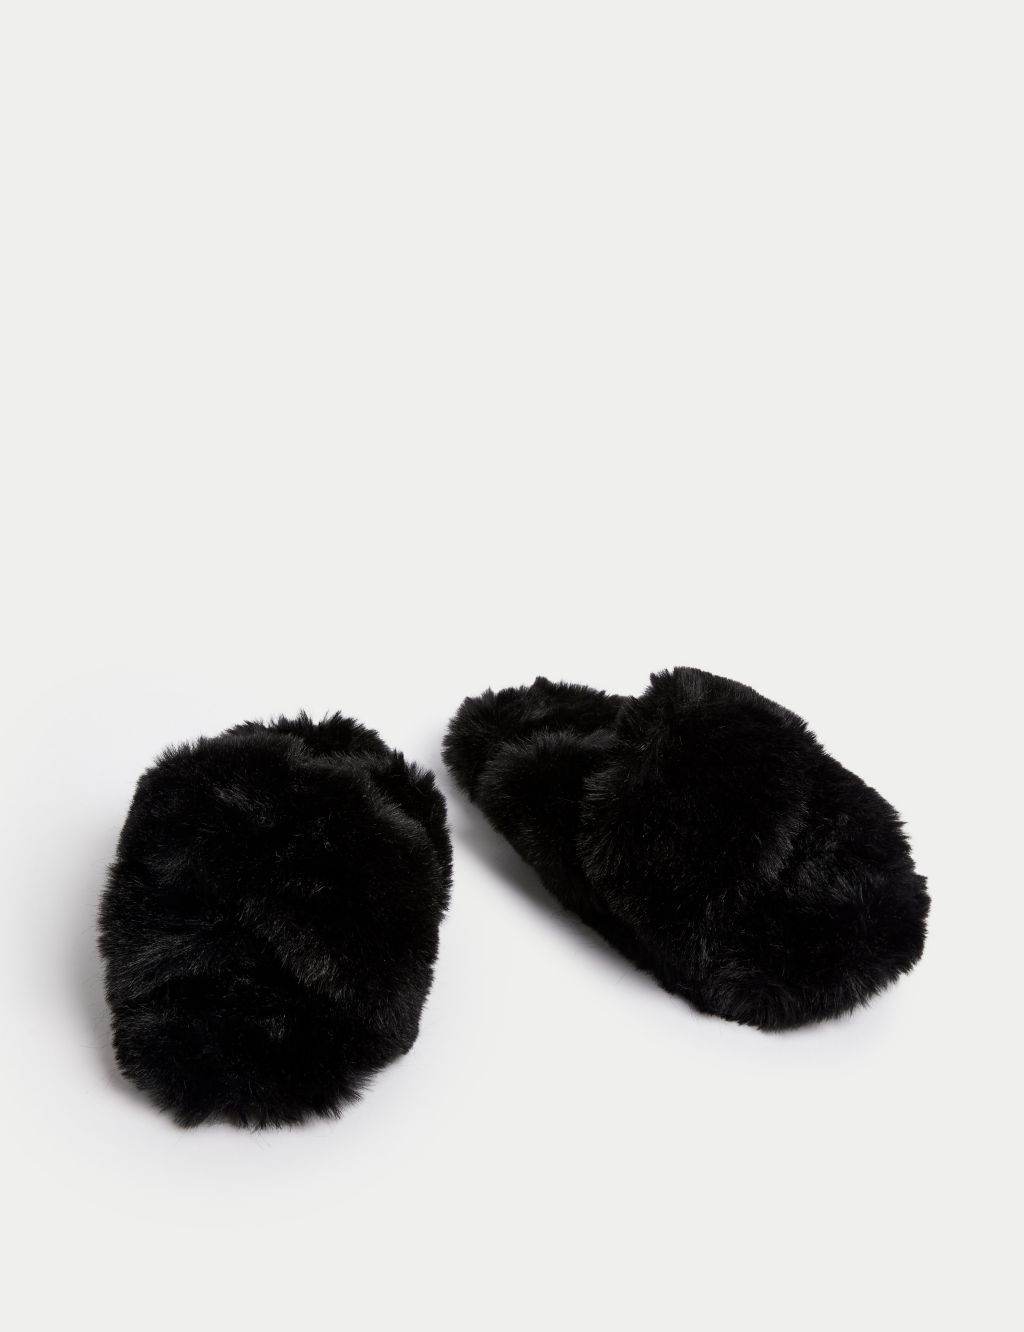 Kids' Faux Fur Slippers (13 Small - 6 Large) image 2